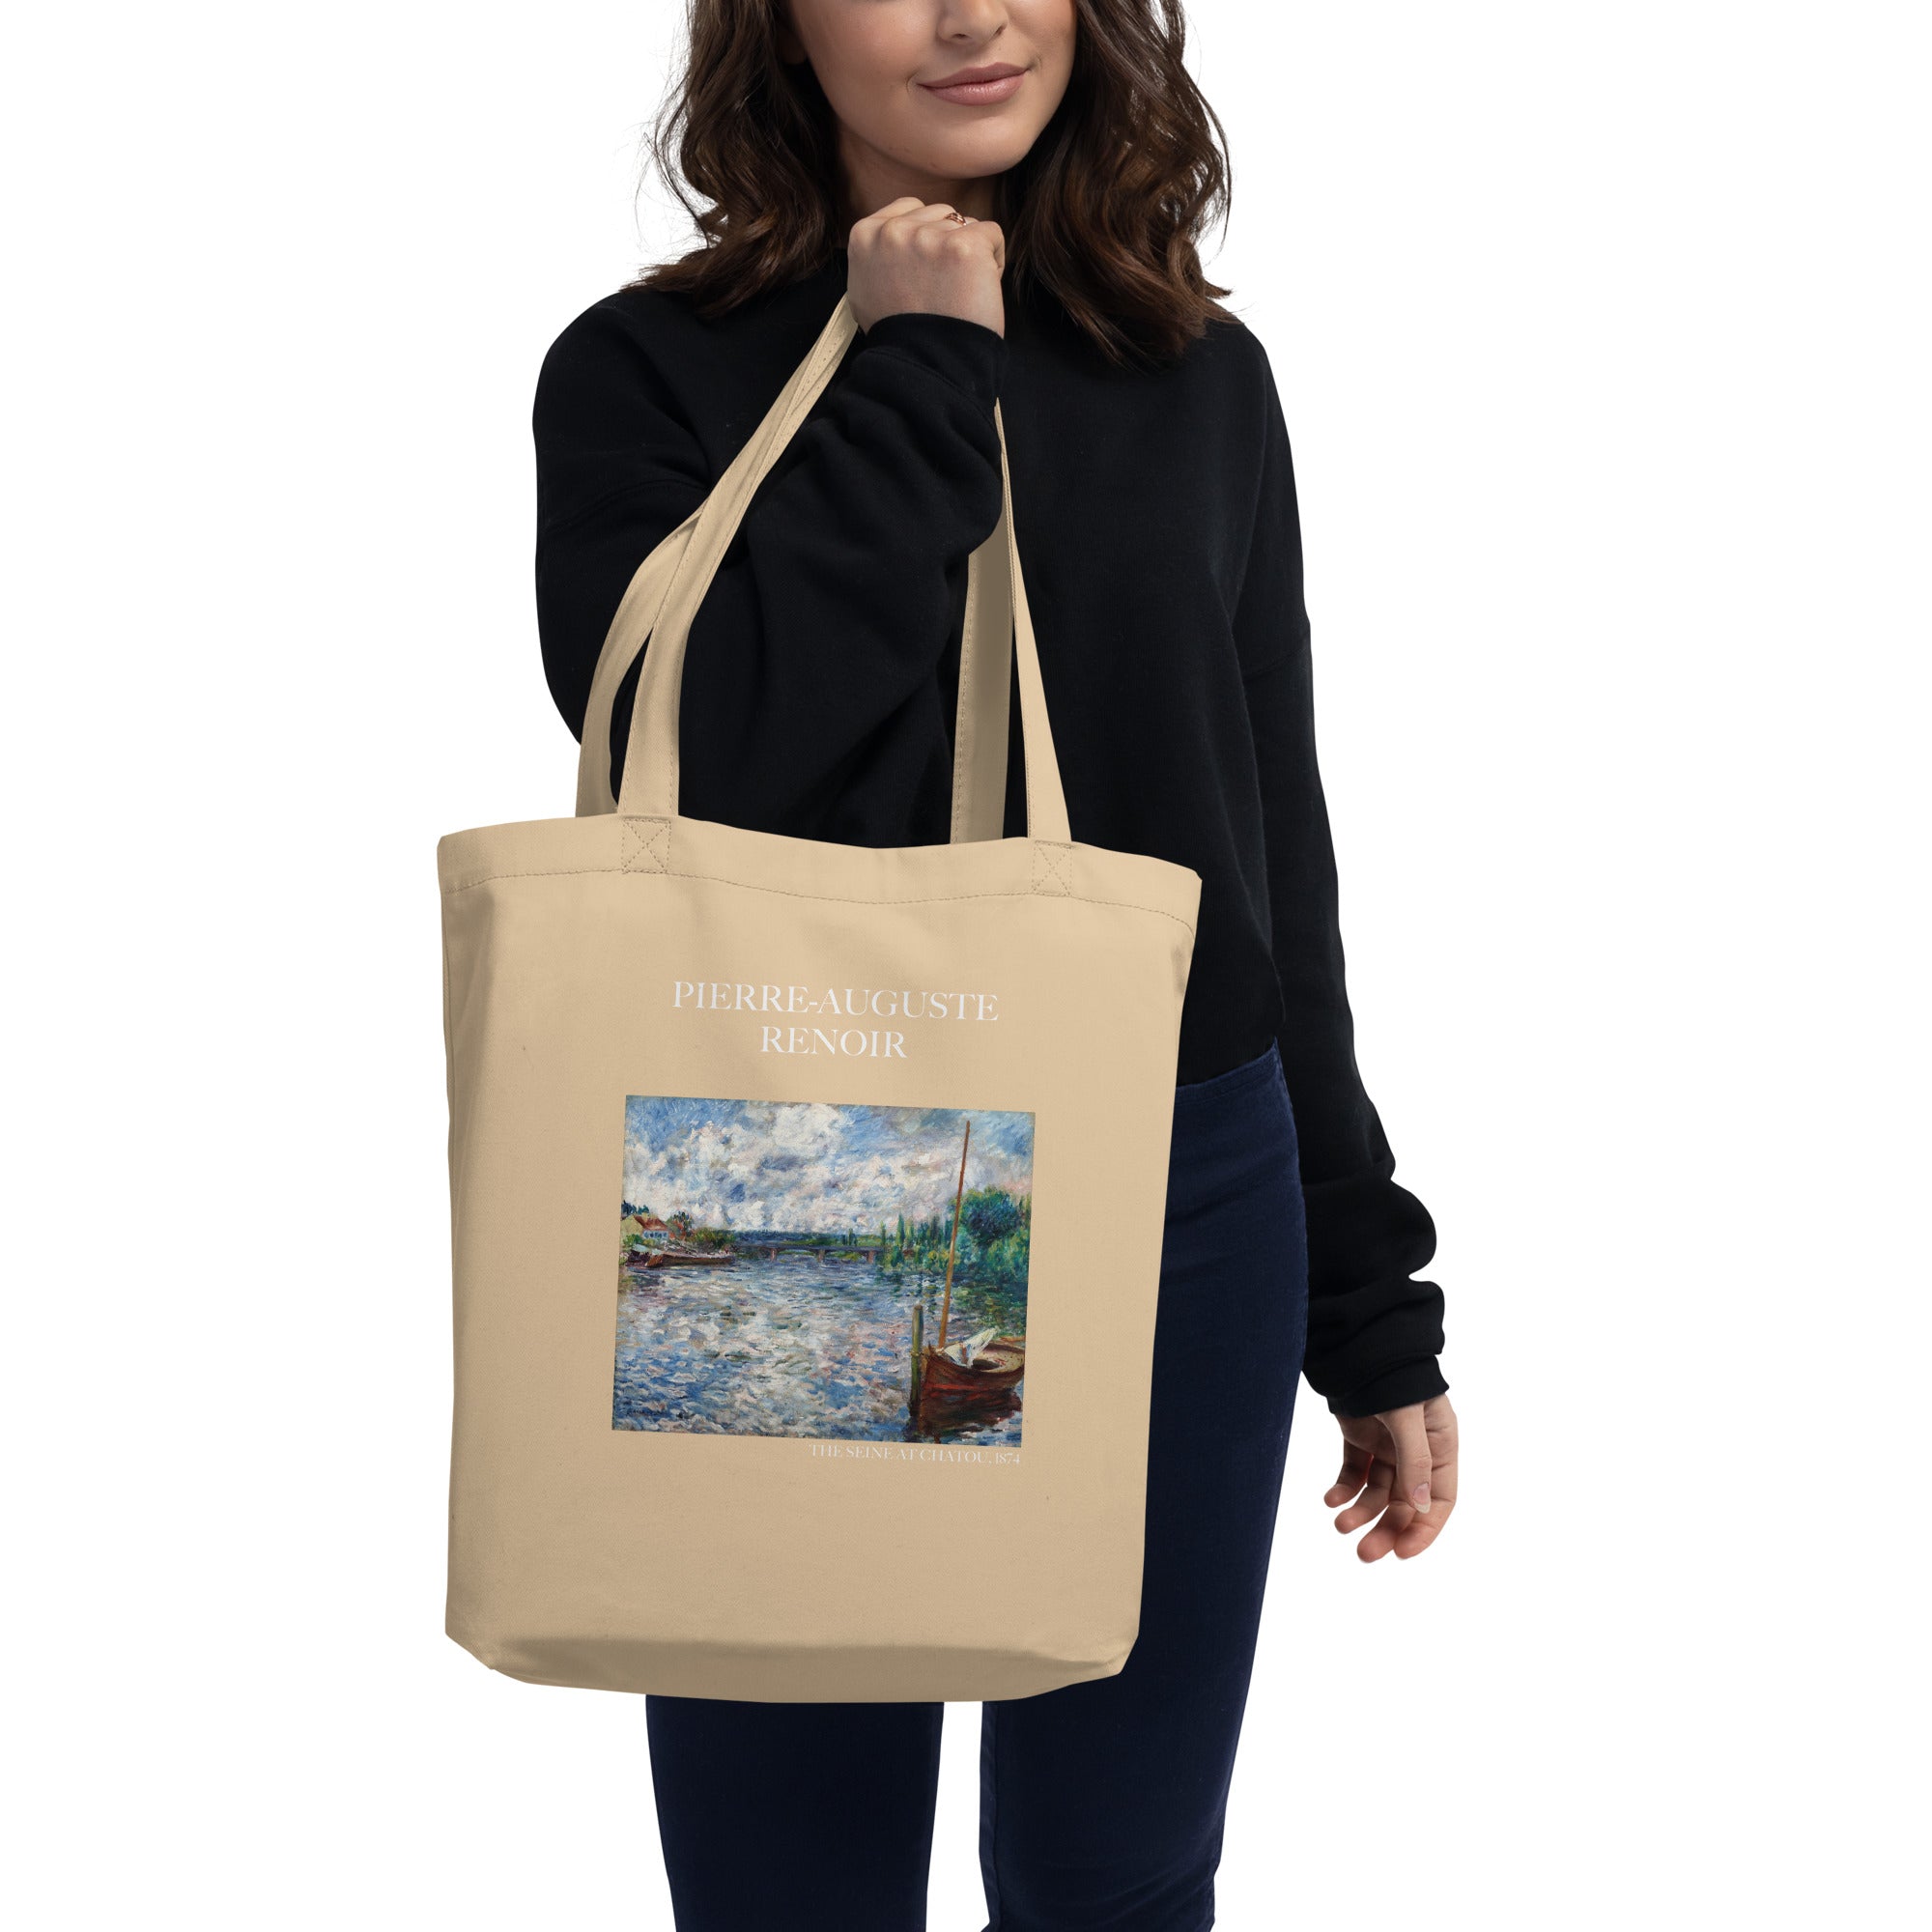 Pierre-Auguste Renoir 'The Seine at Chatou' Famous Painting Totebag | Eco Friendly Art Tote Bag